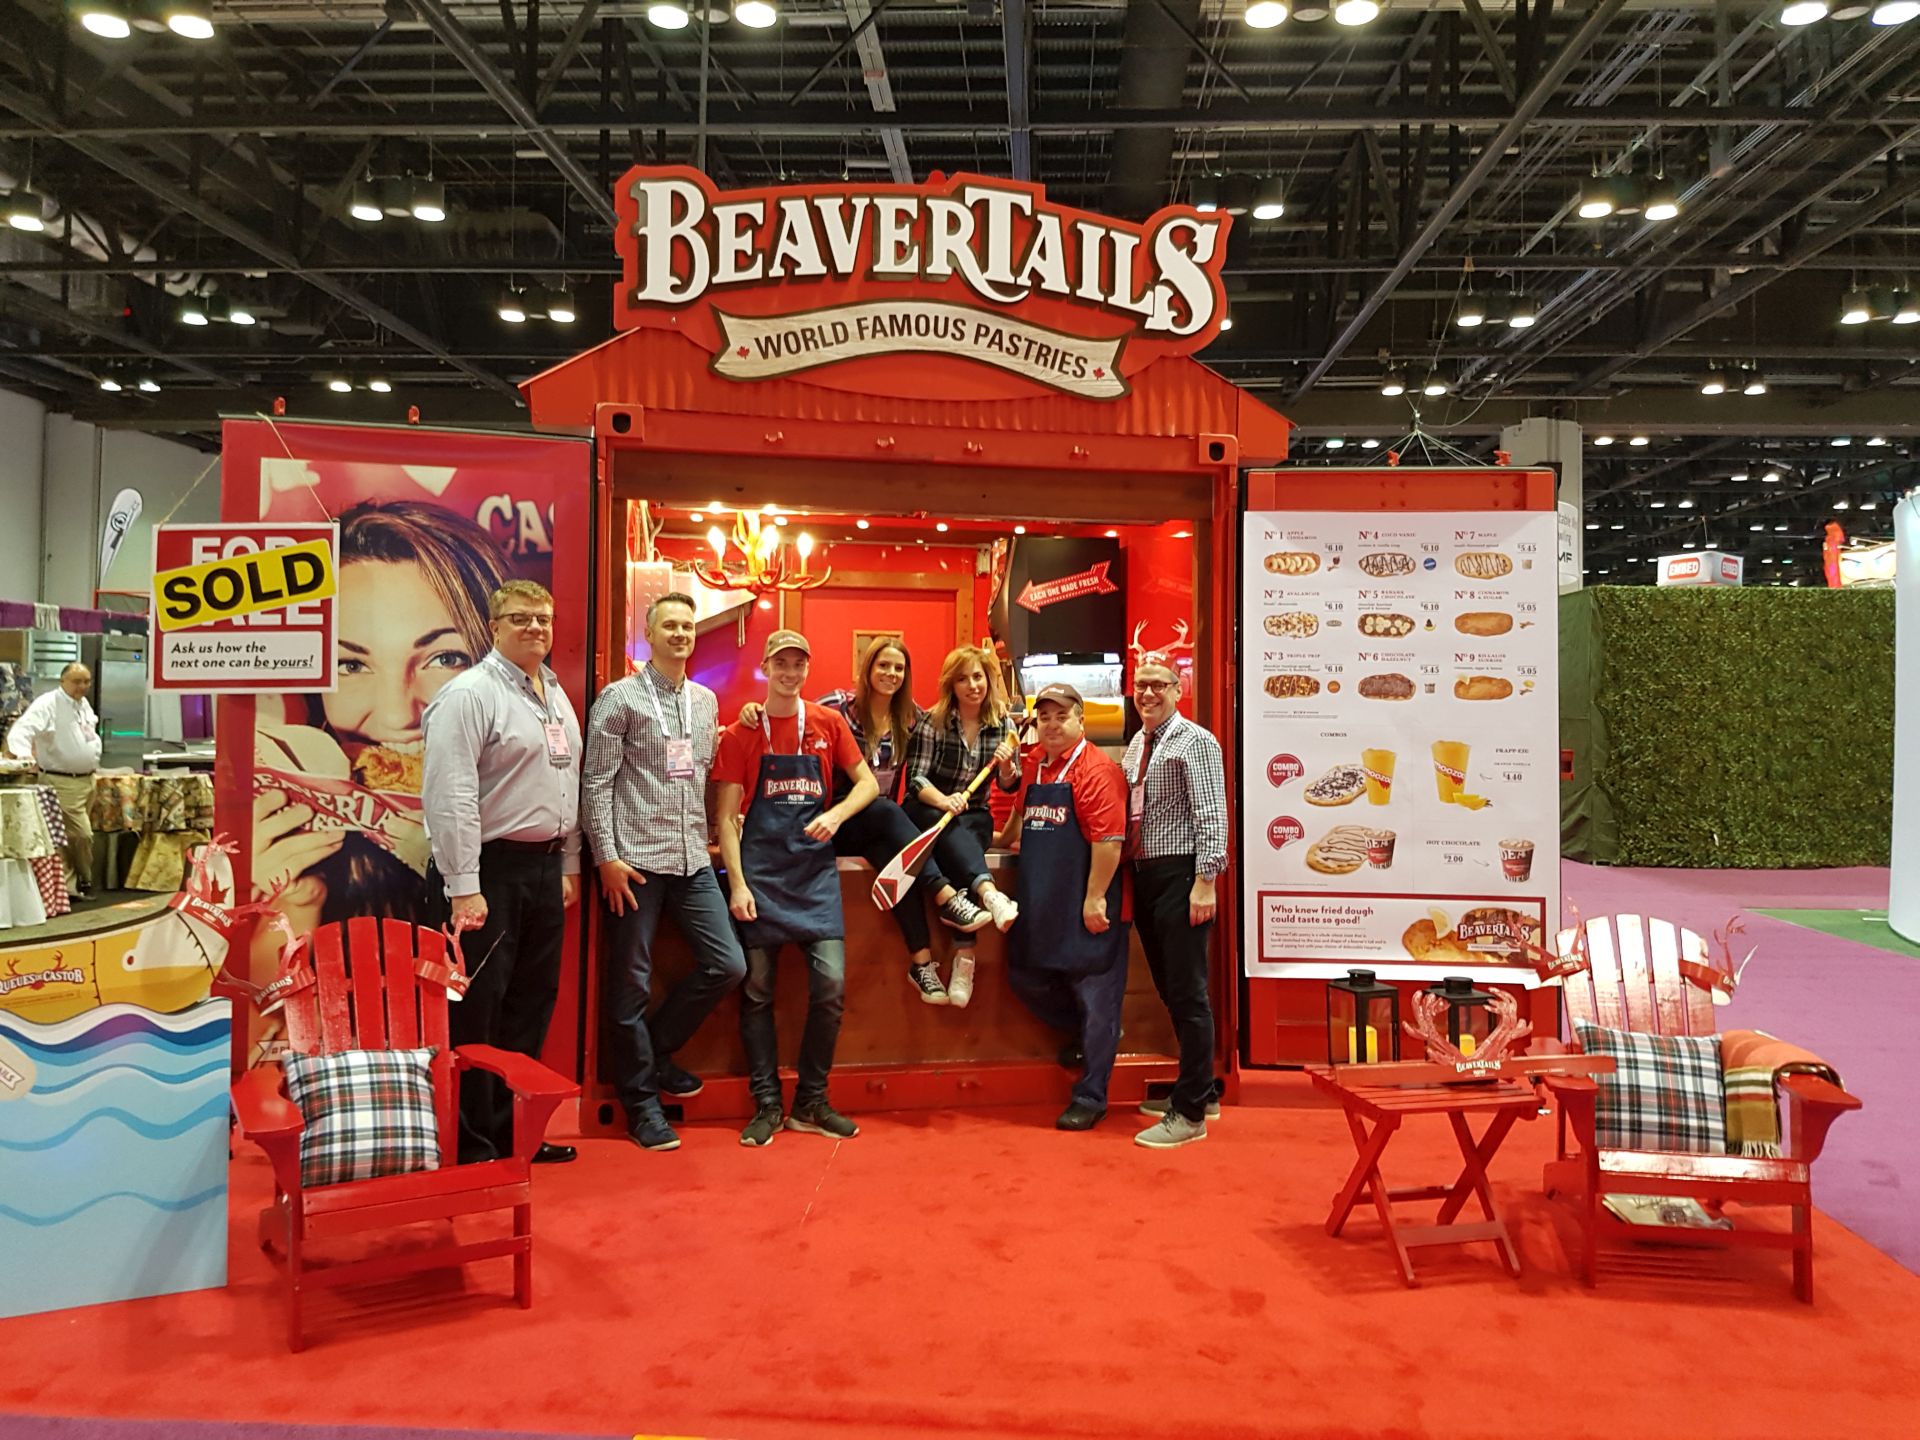 The BeaverTails booth at IAAPA 2016